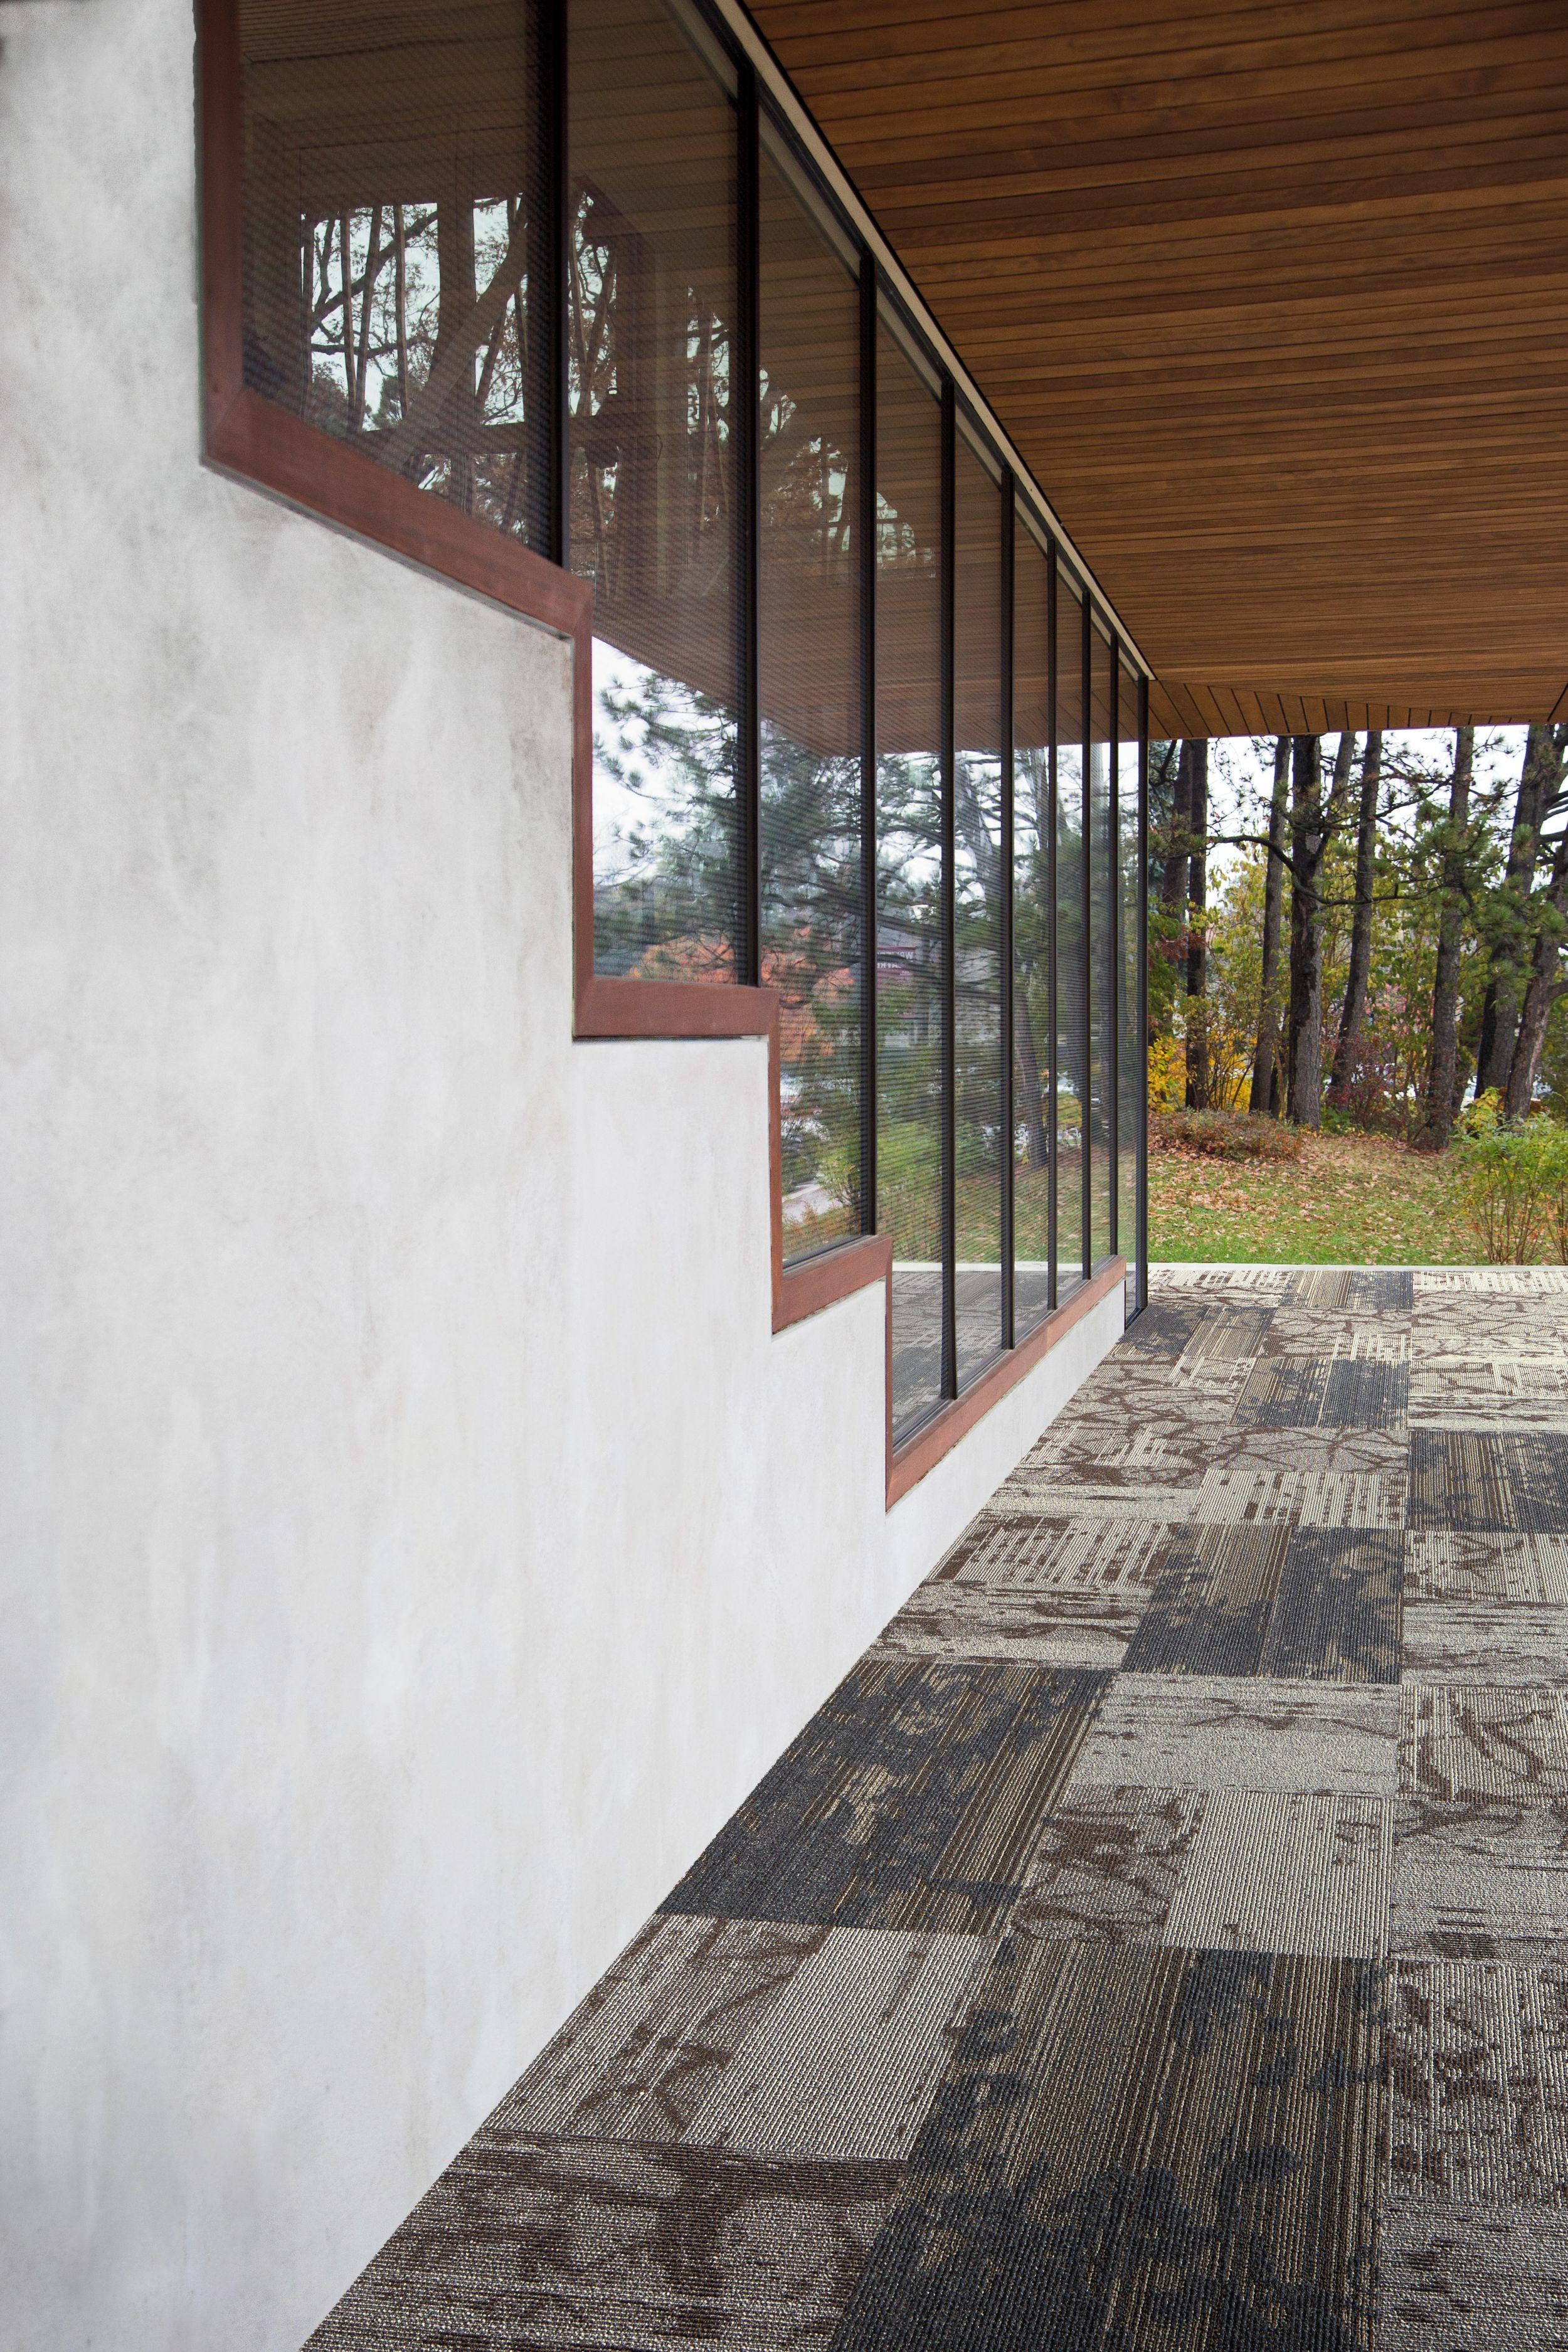 Interface Glazing and Ground plank carpet tile shown for inspiration in outdoor setting numéro d’image 10